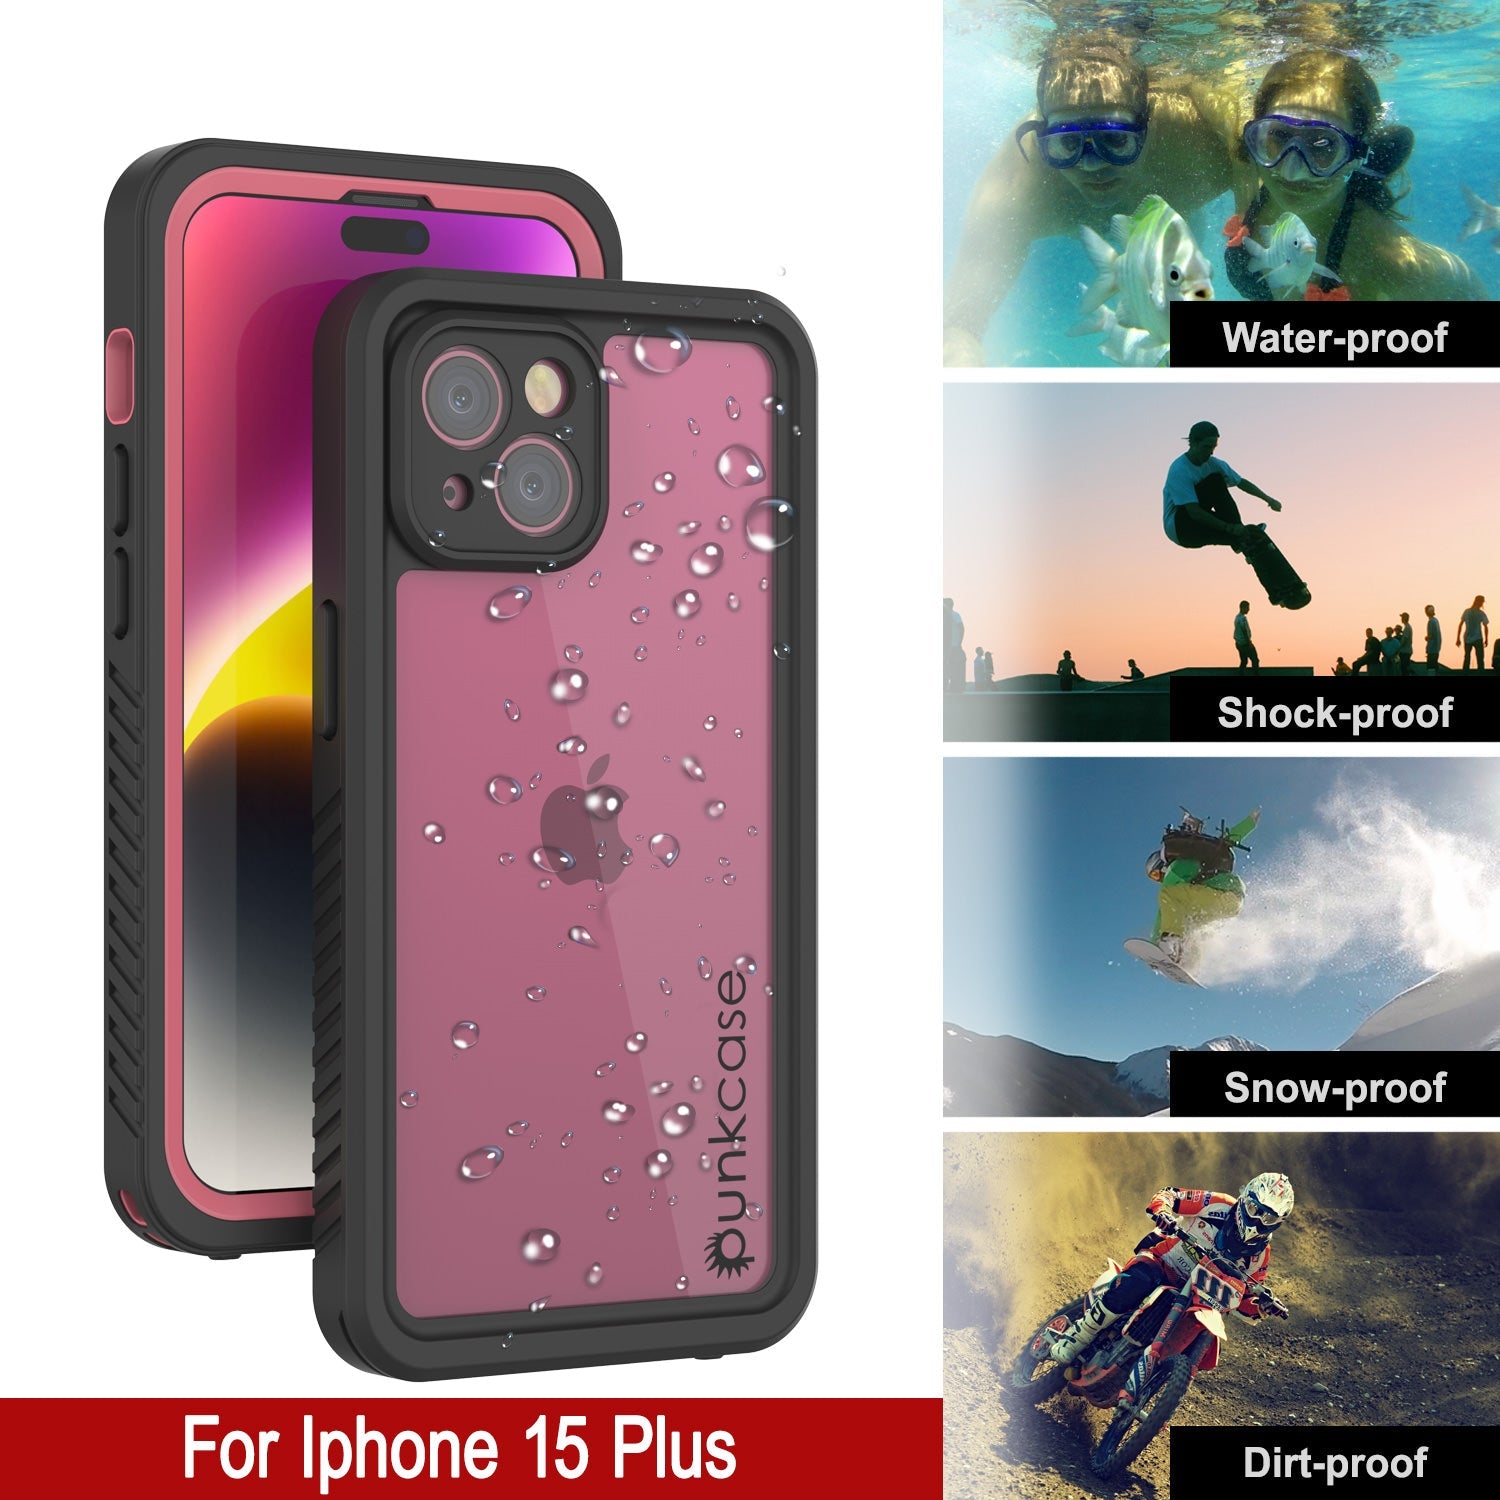 iPhone 15 Plus Waterproof Case, Punkcase [Extreme Series] Armor Cover W/ Built In Screen Protector [Pink]